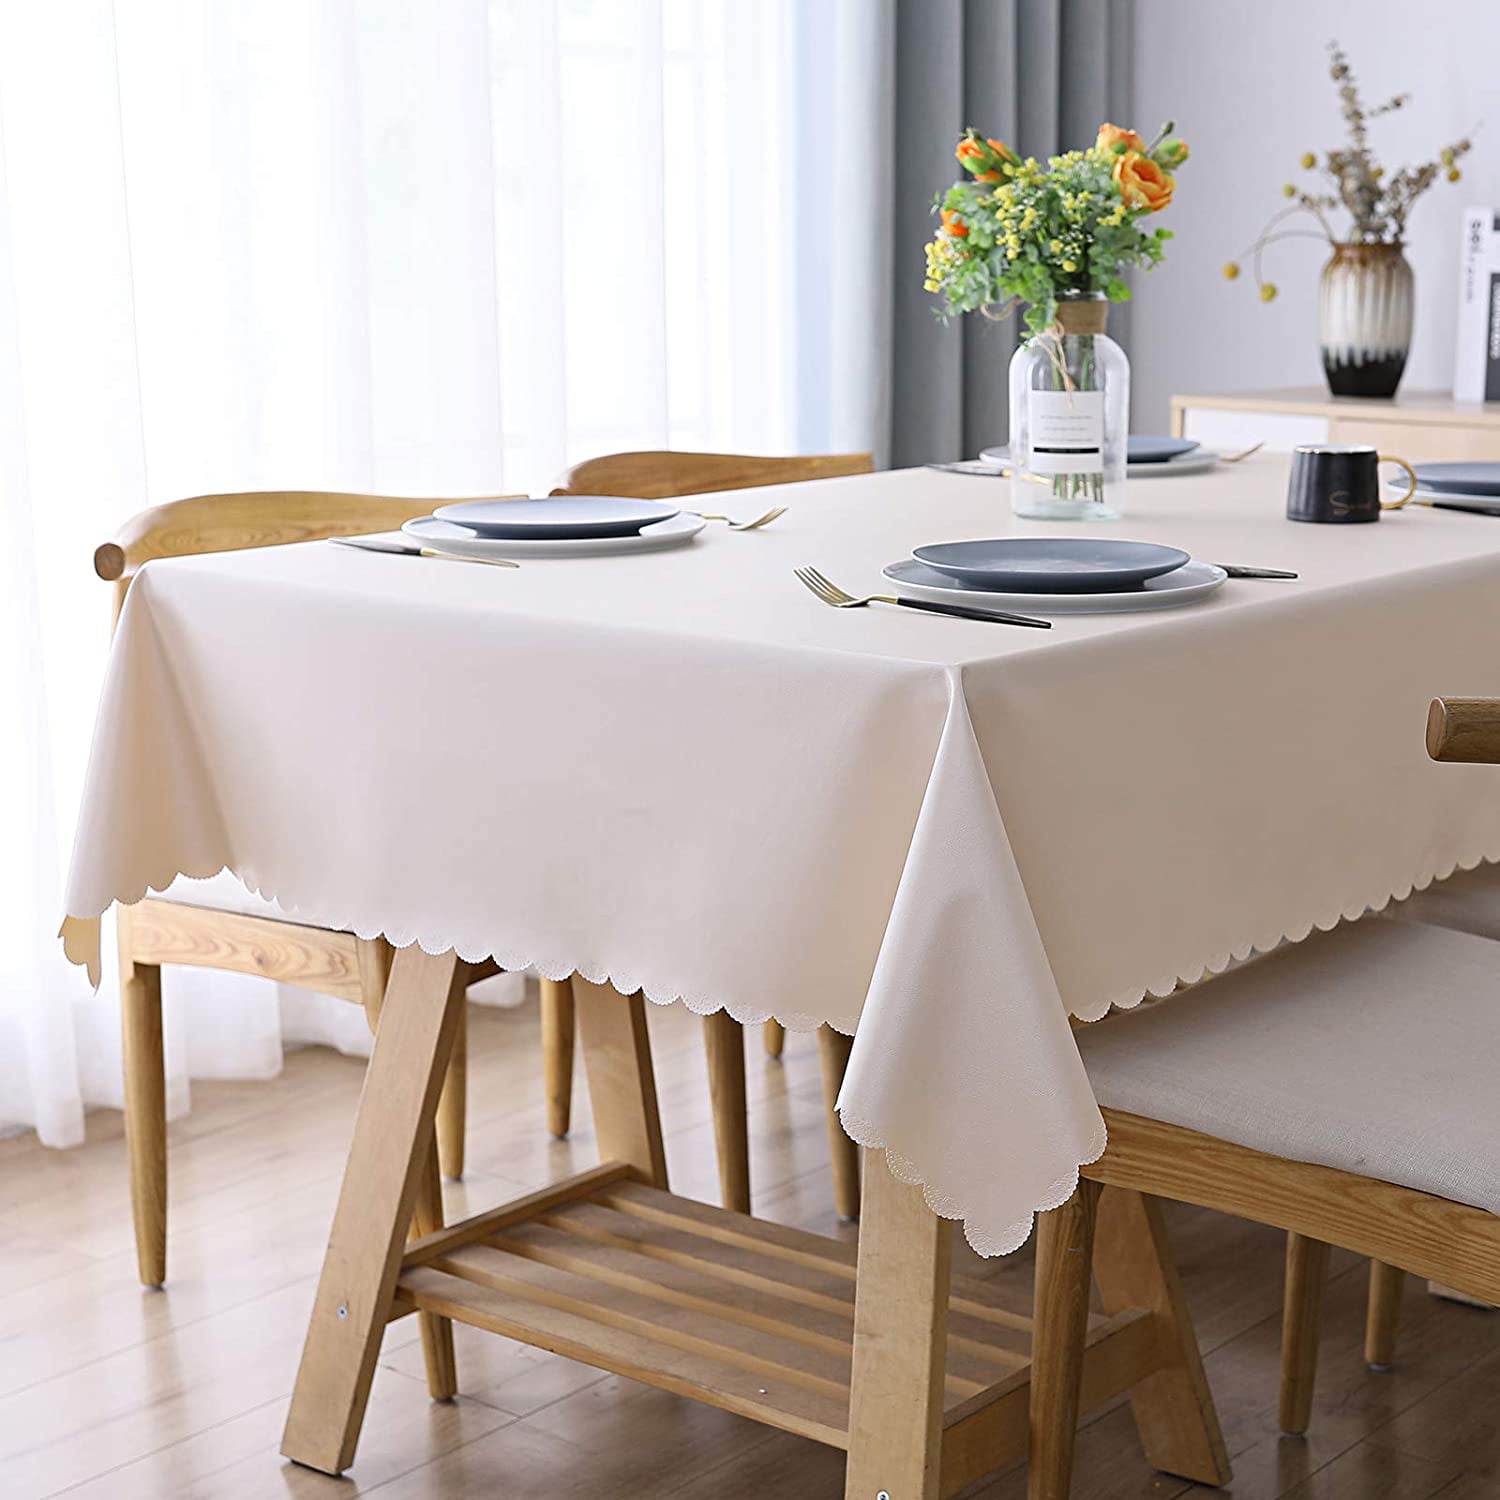 Details about   Clear Vinyl Plastic Film Tablecloth Table Cover Protector Waterproof 